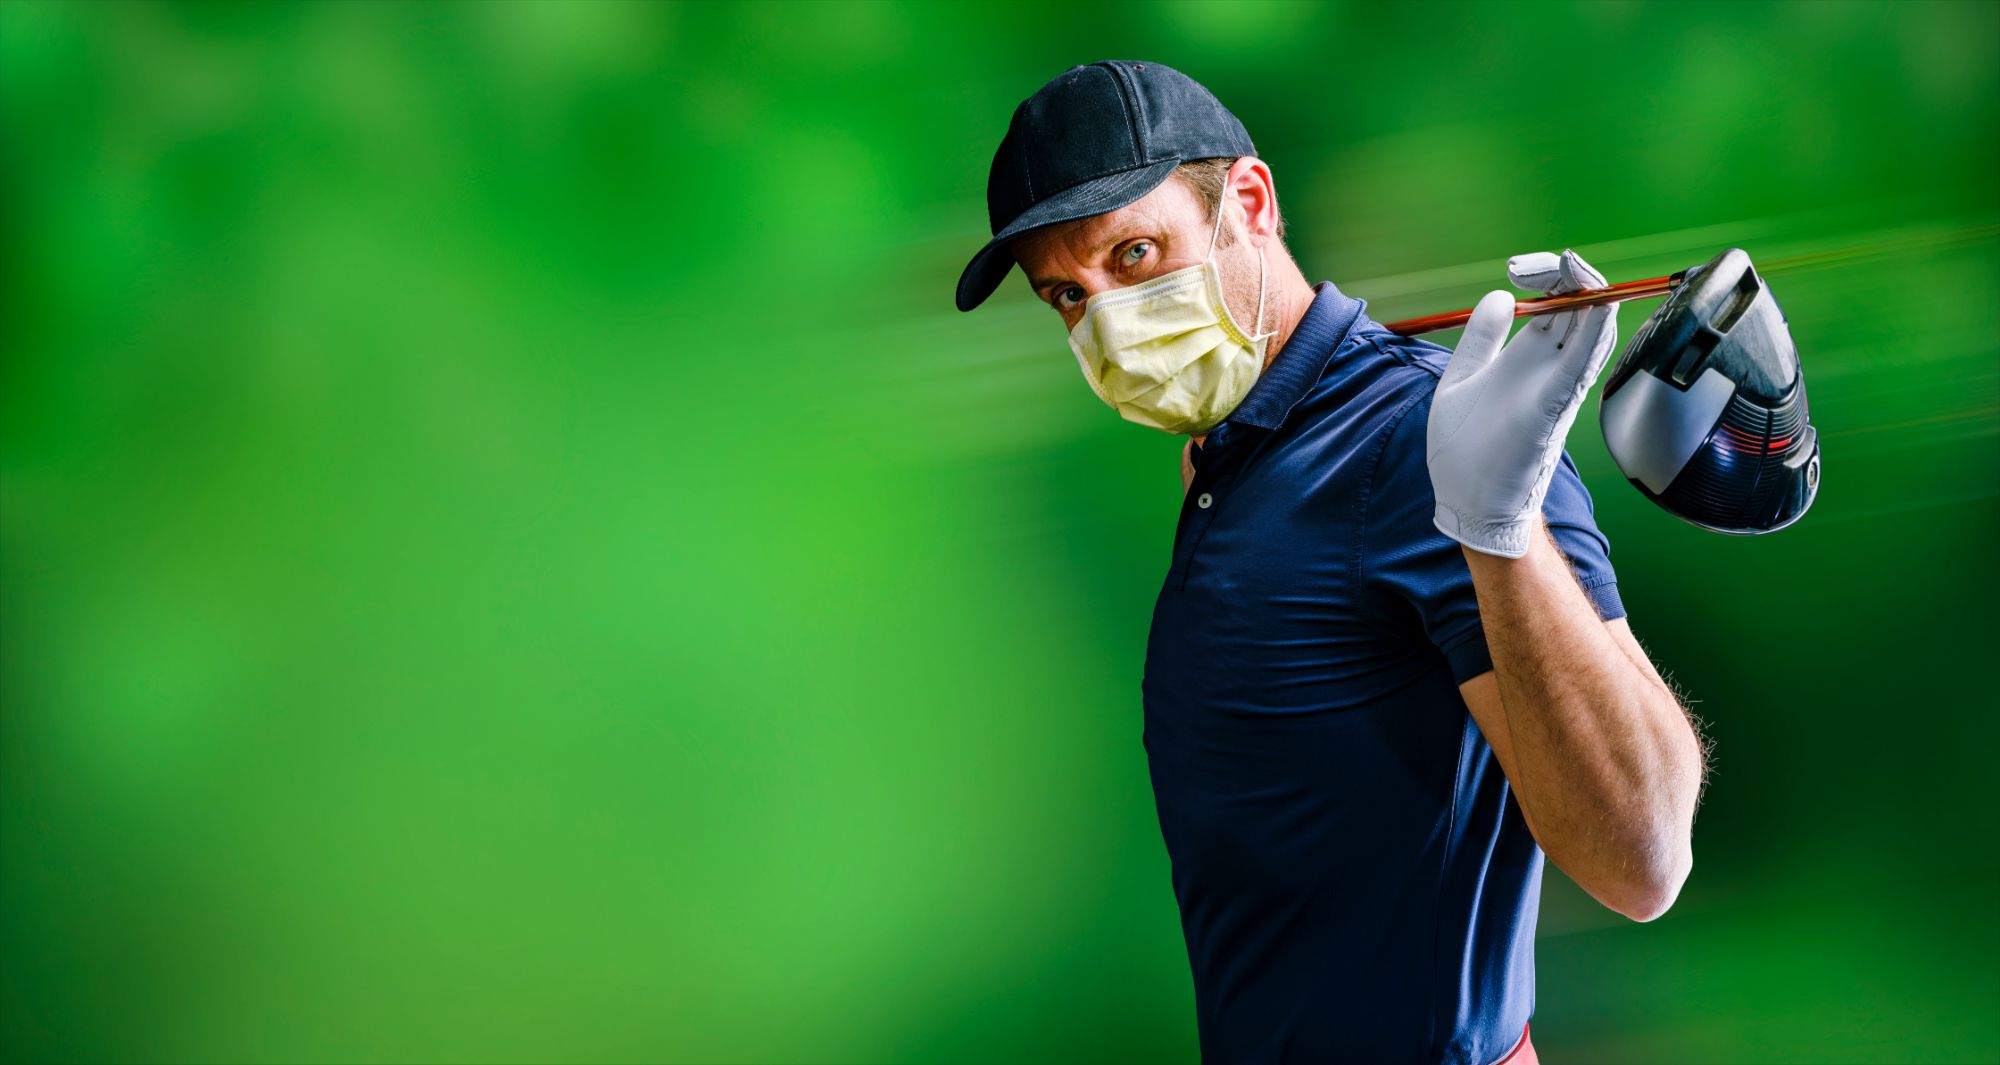 The golfer with the protective mask waits for his turn to make his best shot - COVID-19